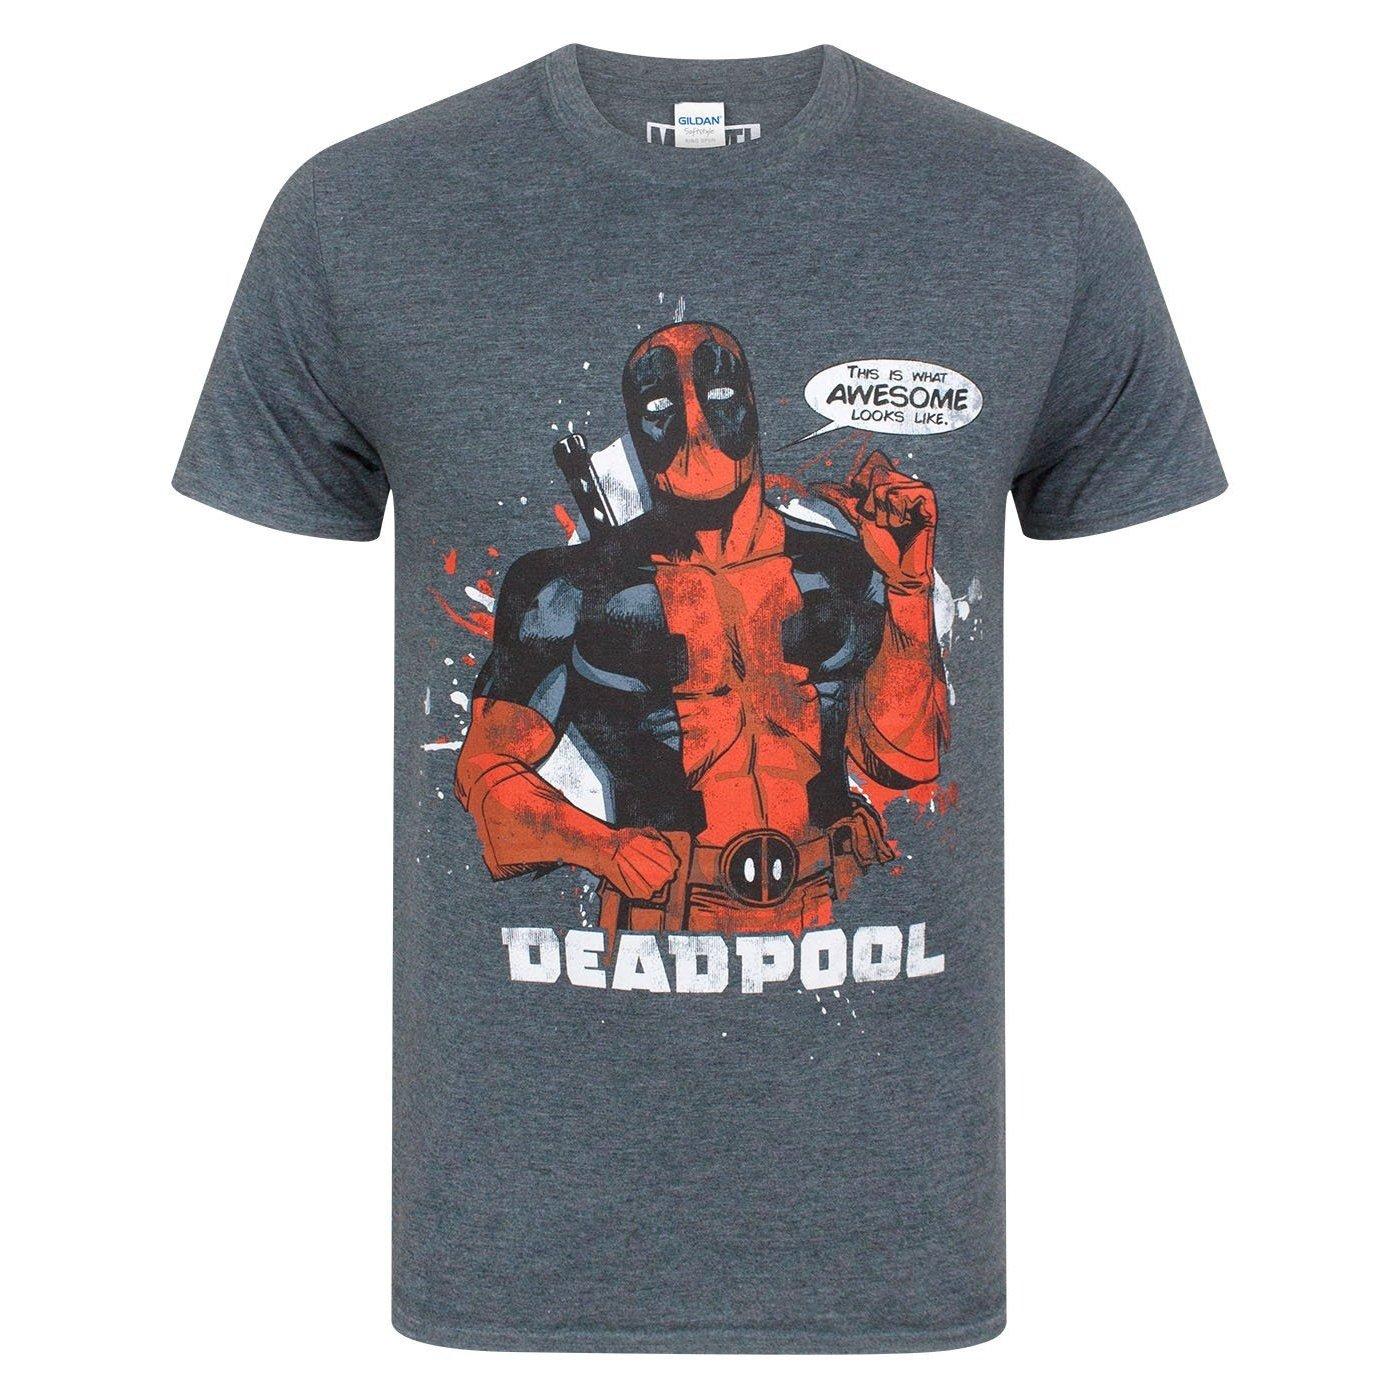 This Is What Awesome Looks Like Tshirt Herren Charcoal Black XL von Deadpool